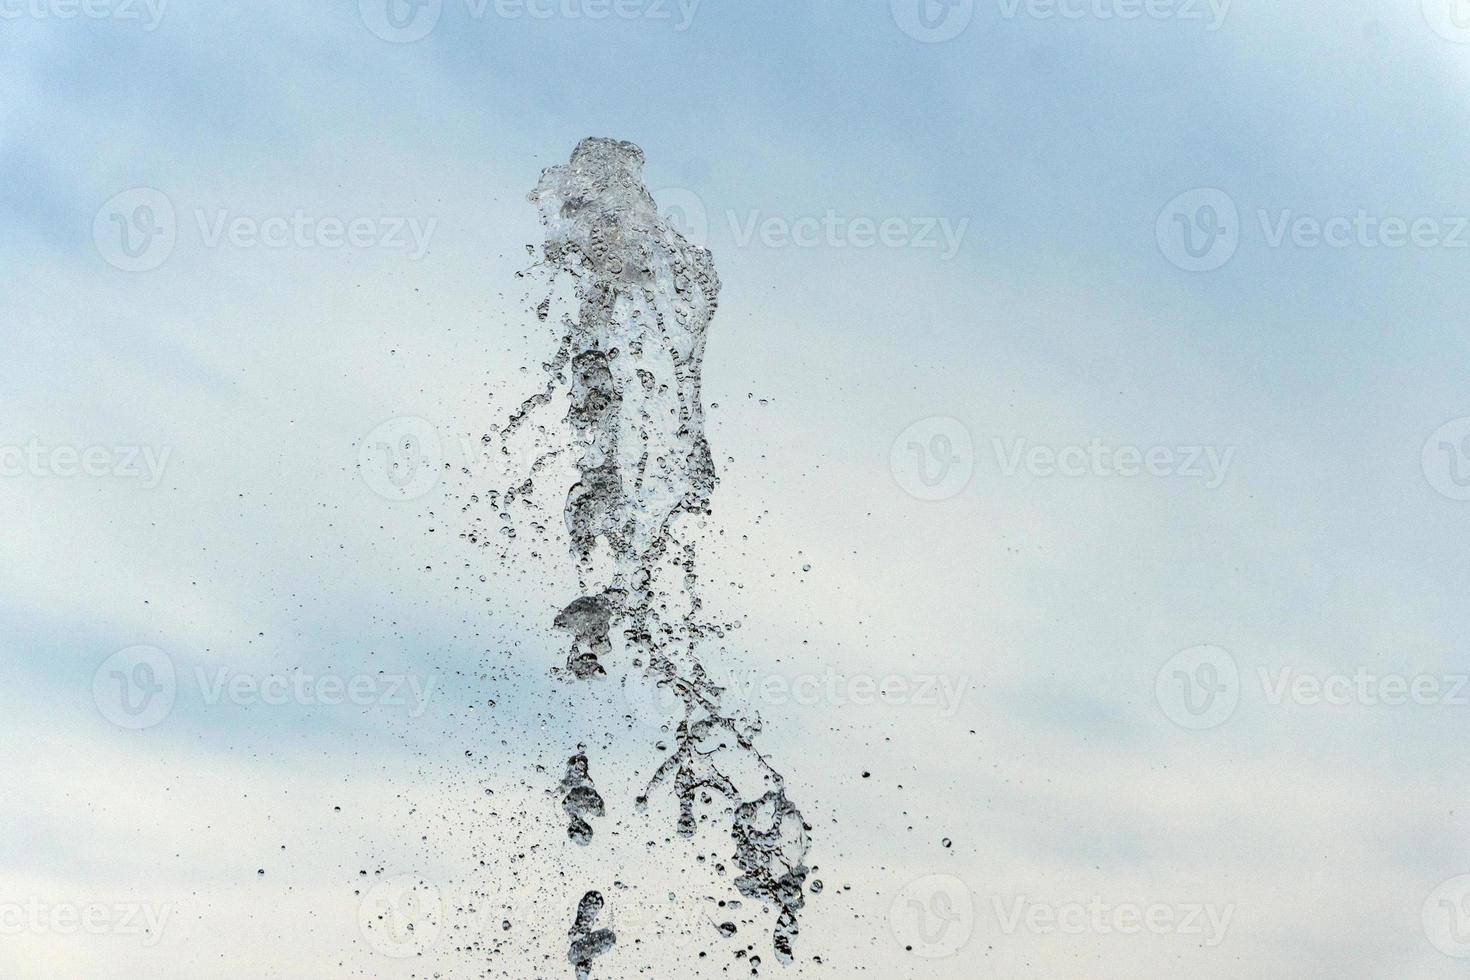 water spurt detail isolated on sky photo